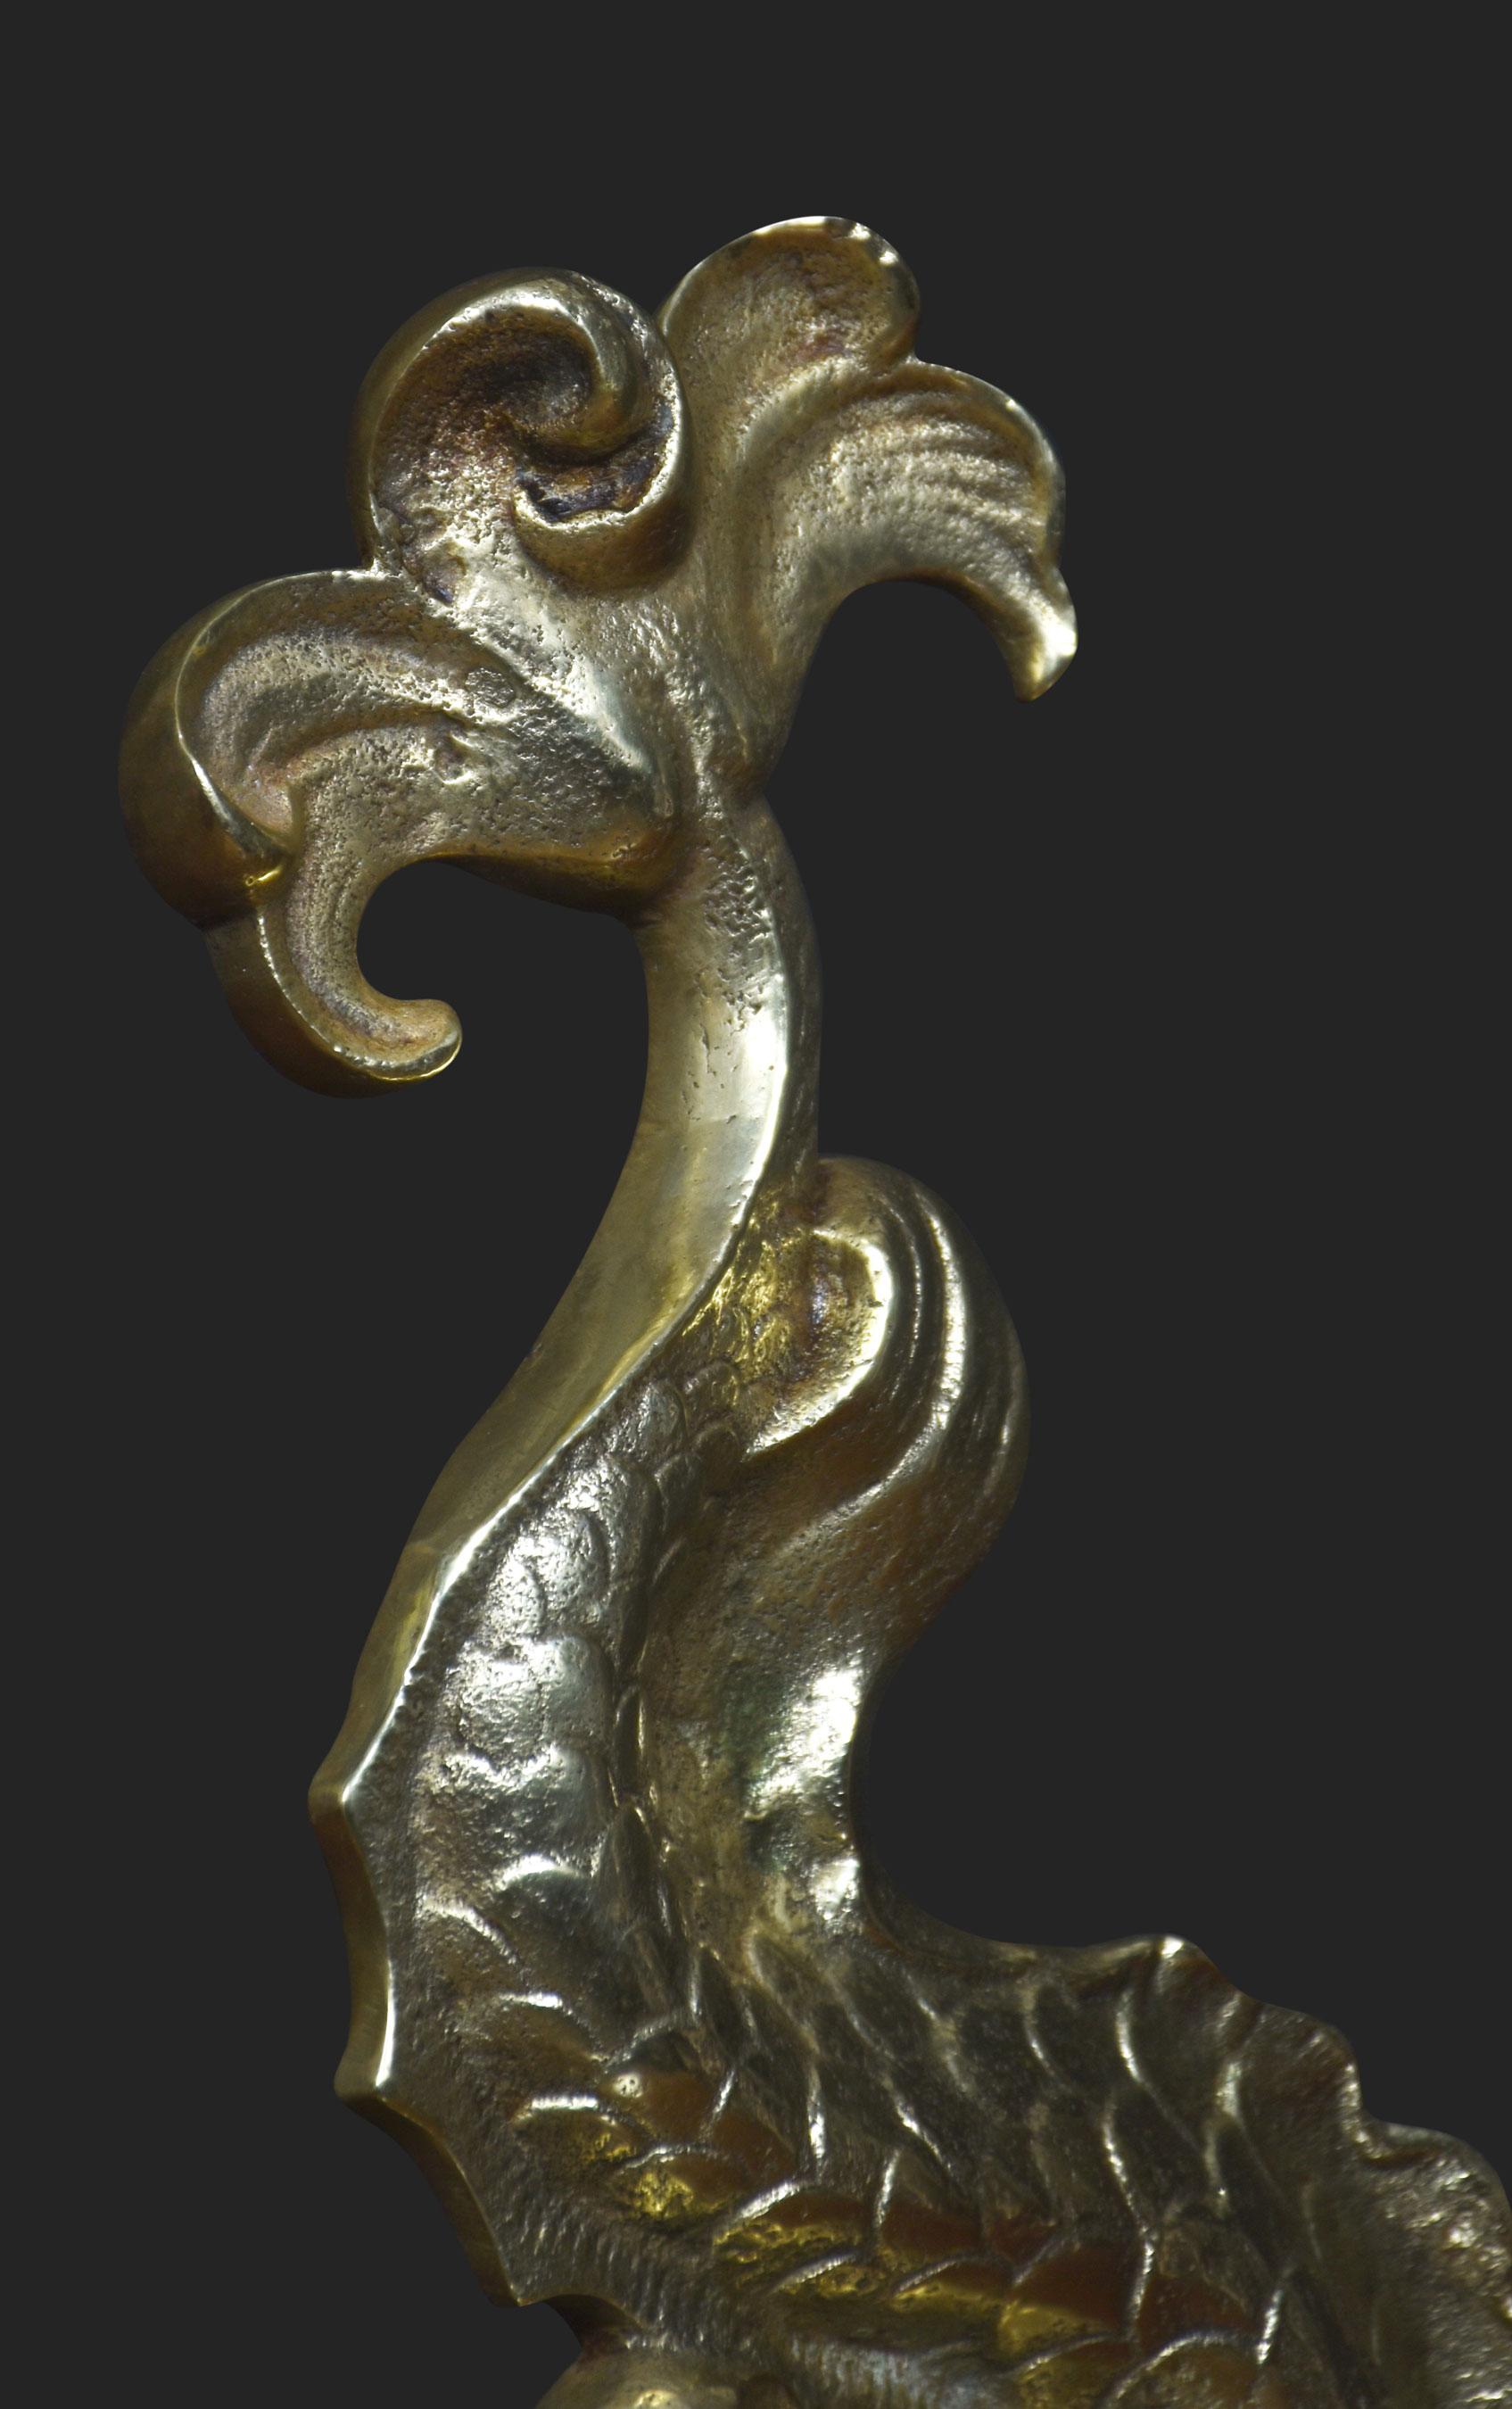 Brass doorstop cast in the form of a stylised heraldic dolphin.
Dimensions
Height 14 Inches
Width 9 Inches
Depth 5 Inches